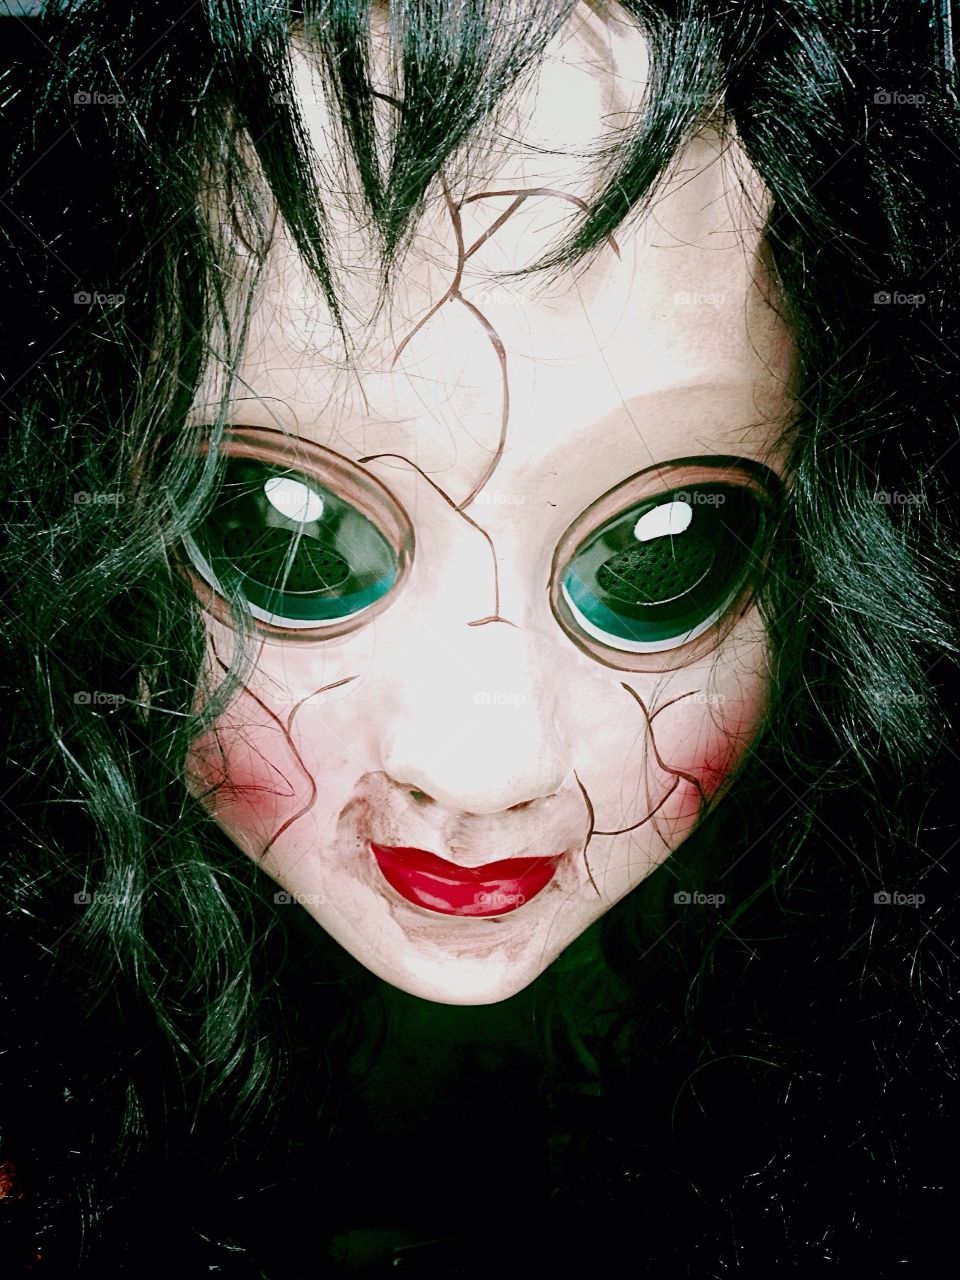 Scary doll with camera lens eyes 